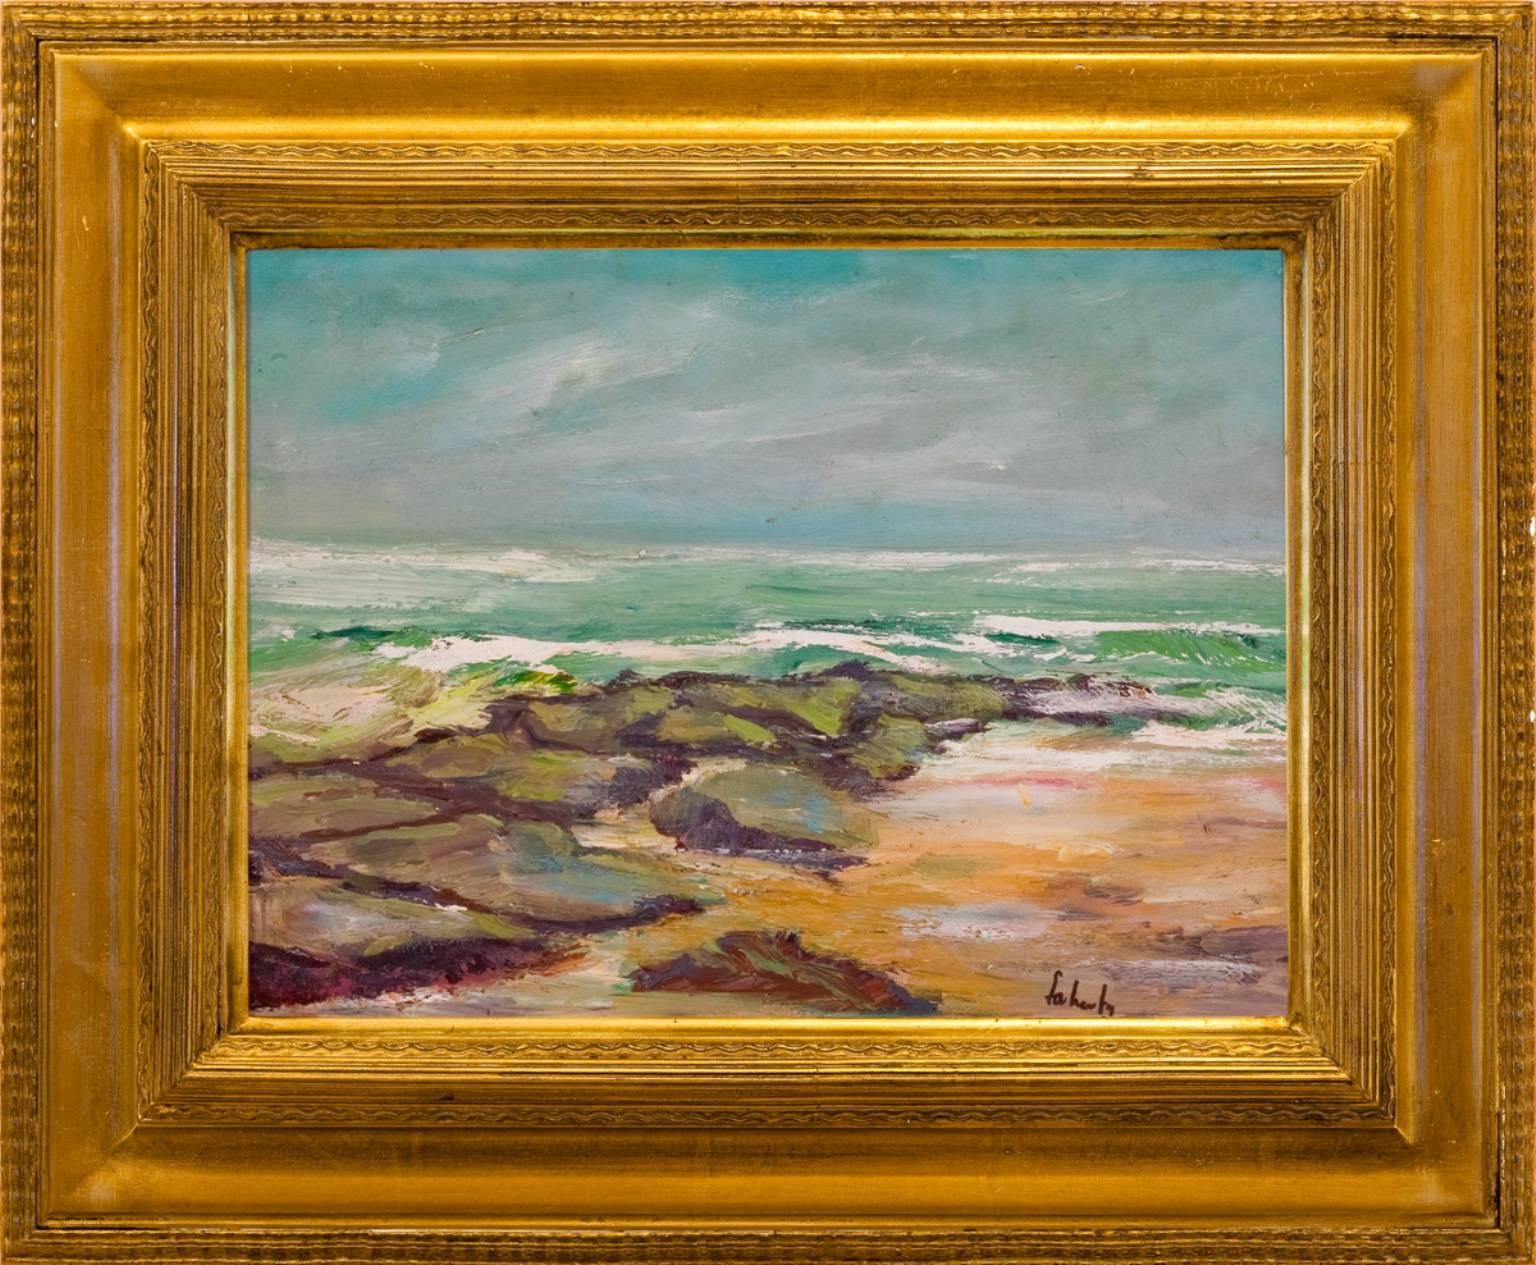 Evelyn Faherty Landscape Painting - "Jersey Shore"